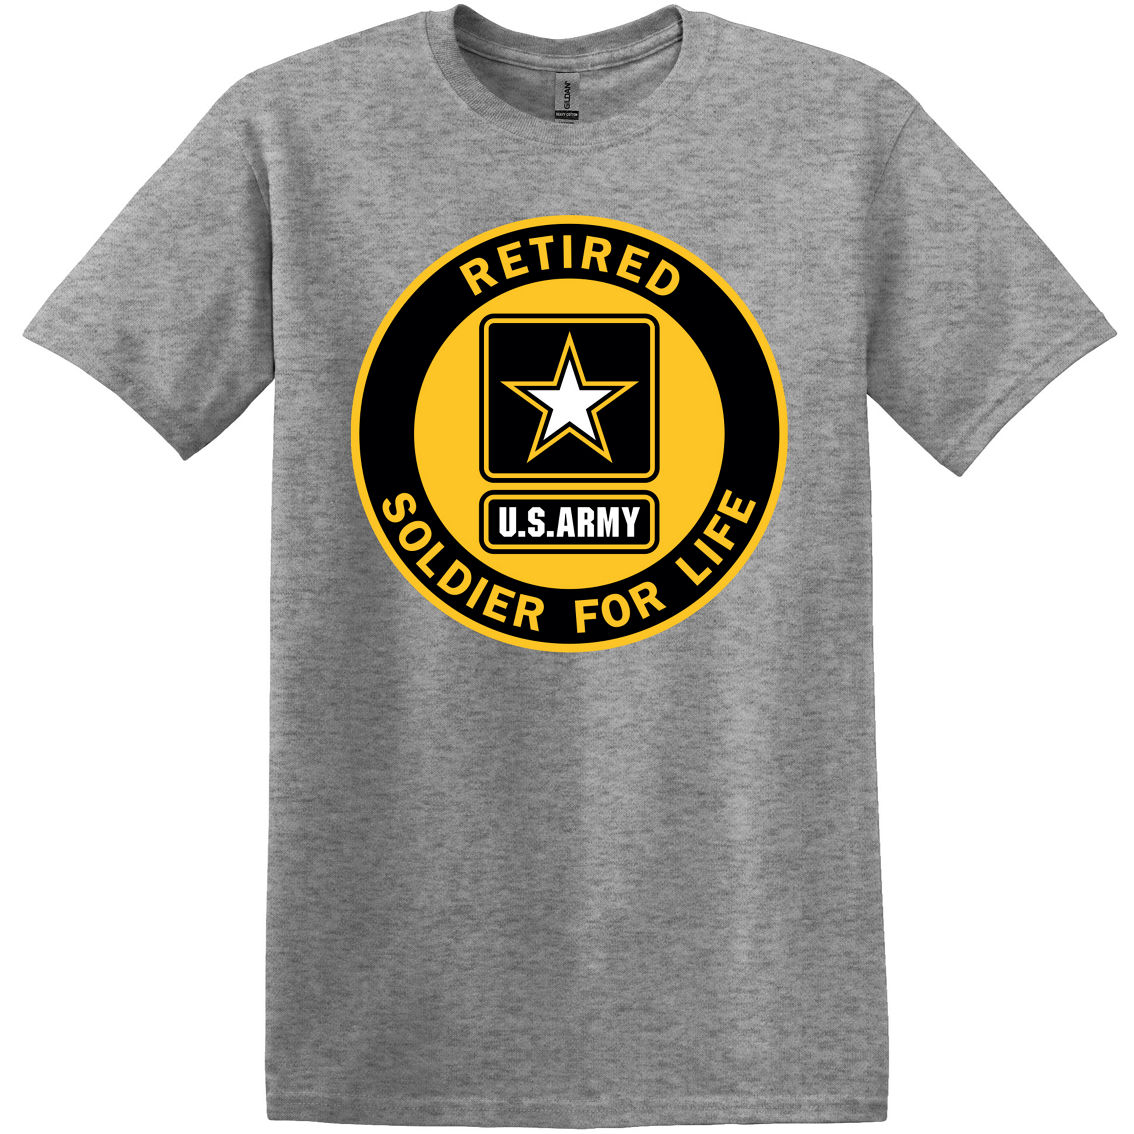 Eagle Crest Retired U.s. Army Soldier For Life Tee | Clothing ...